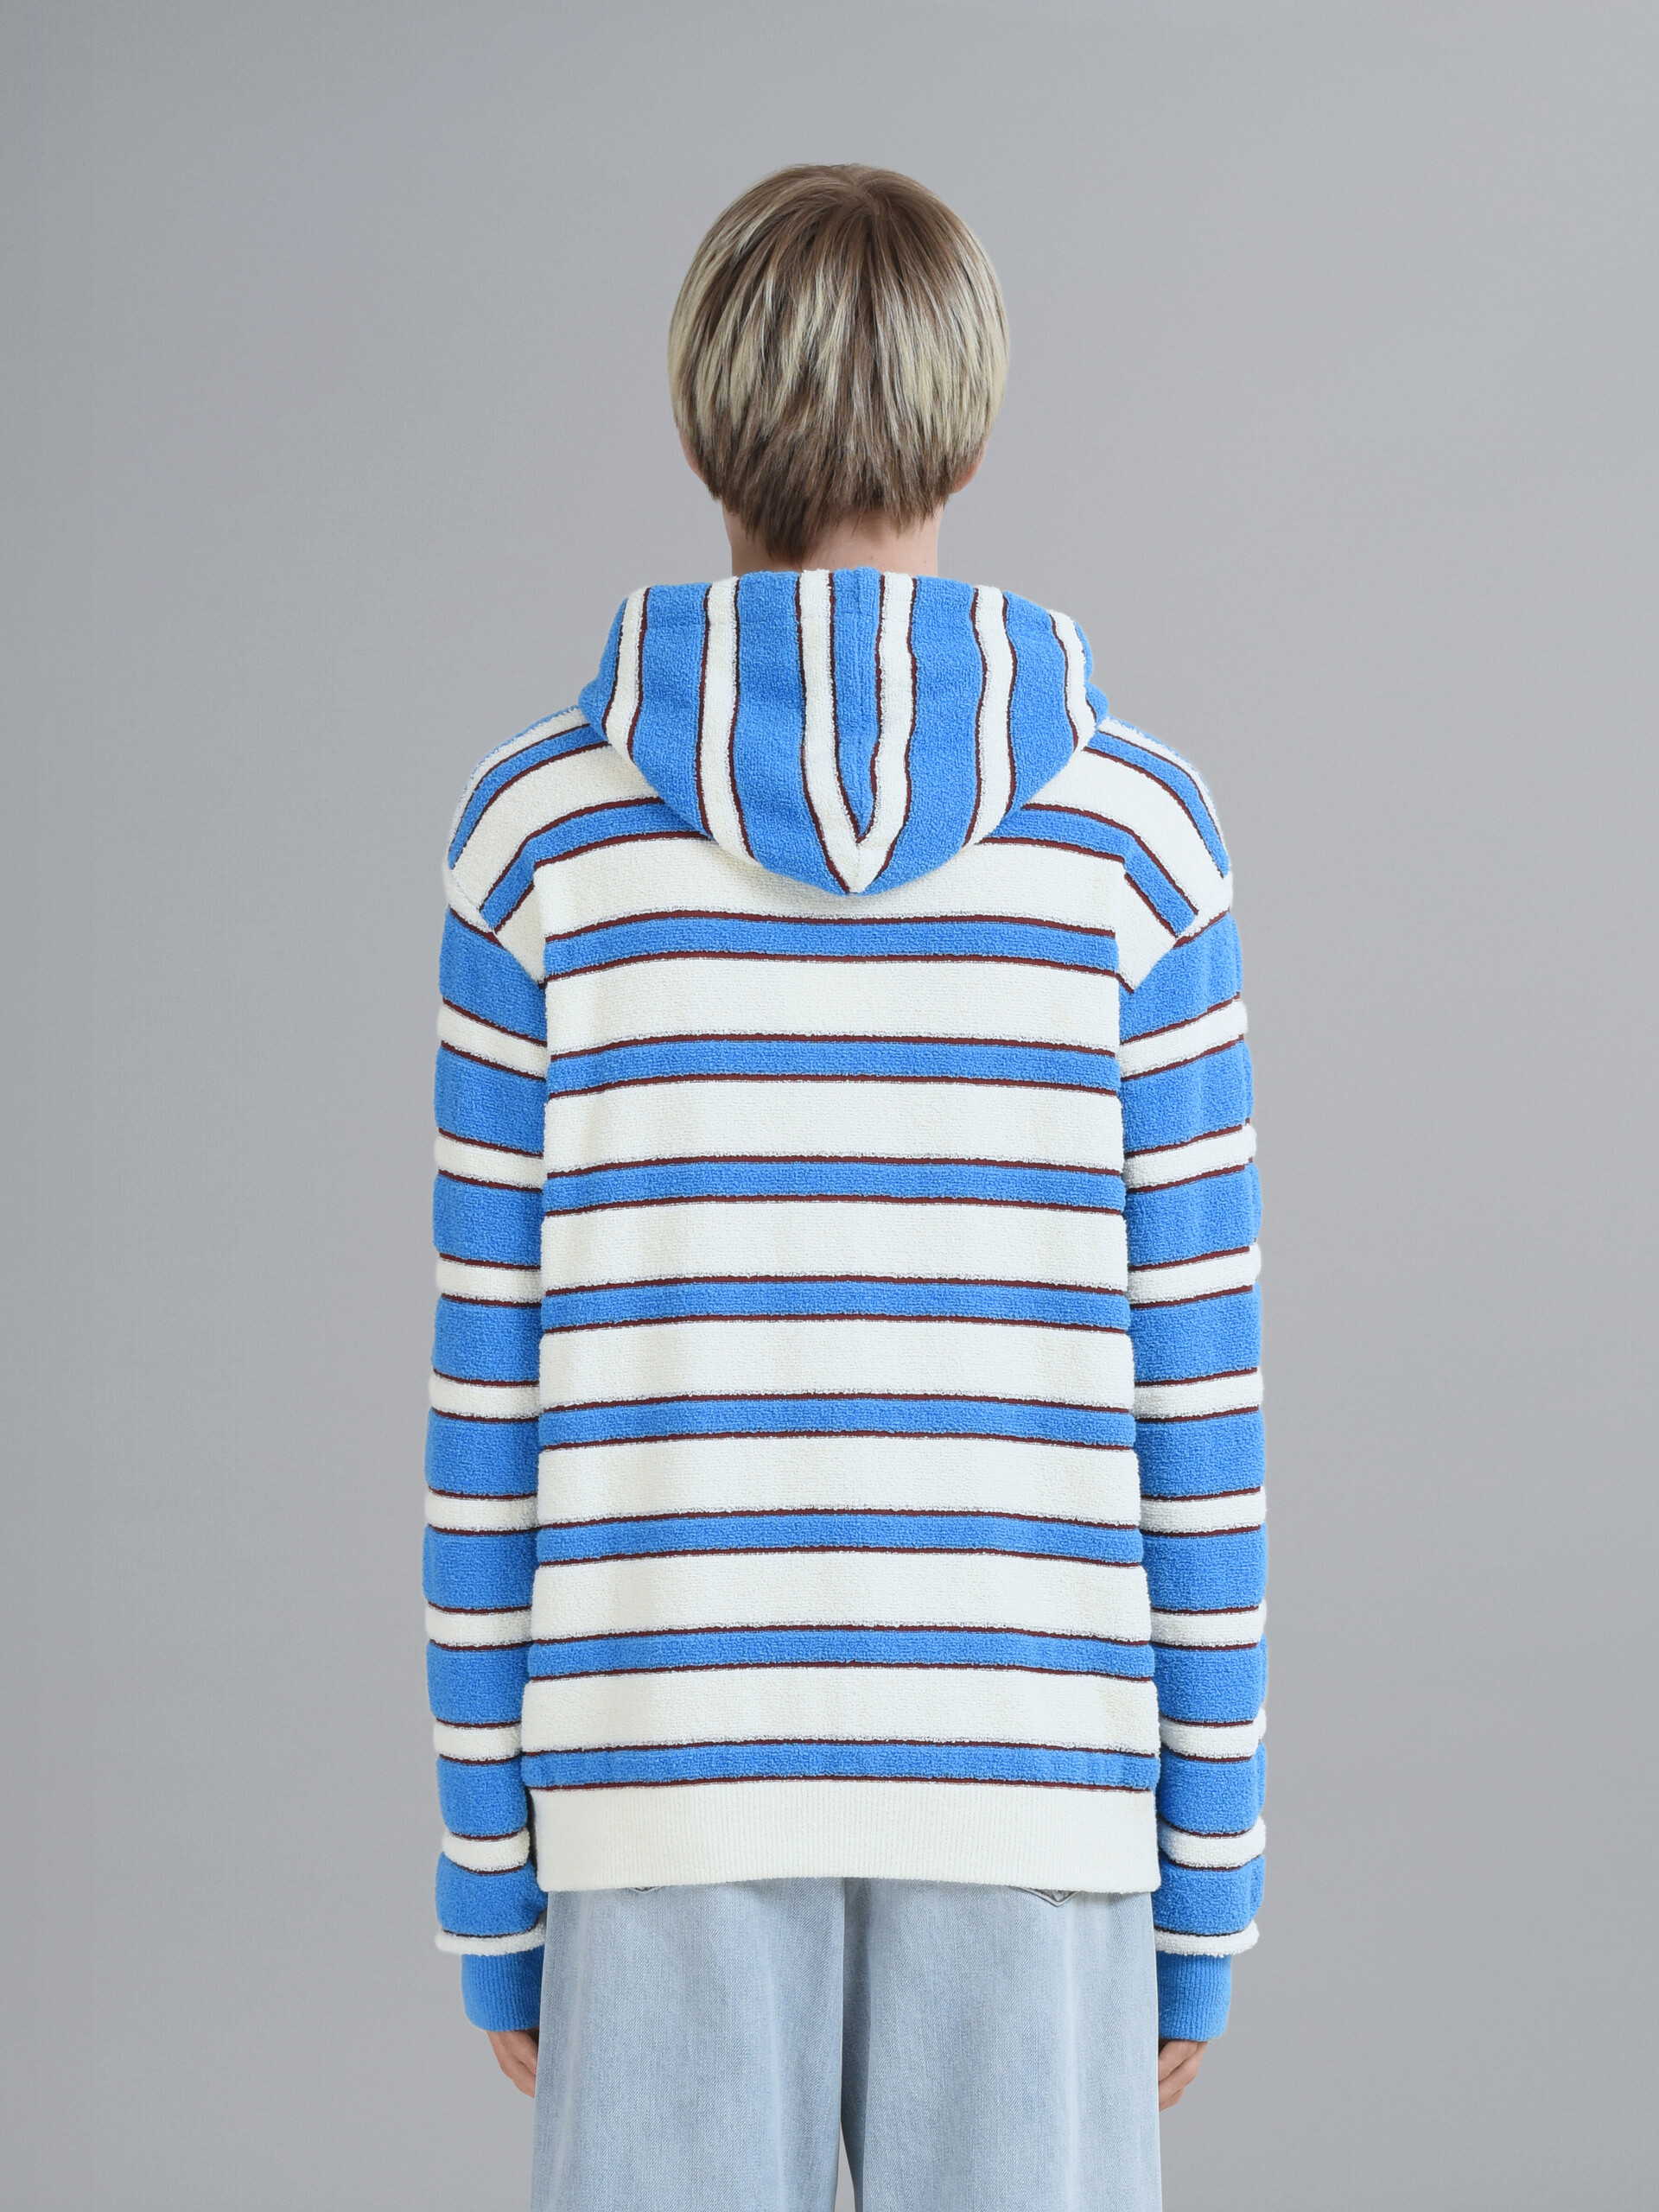 Striped terry-knit hooded sweater - Pullovers - Image 3